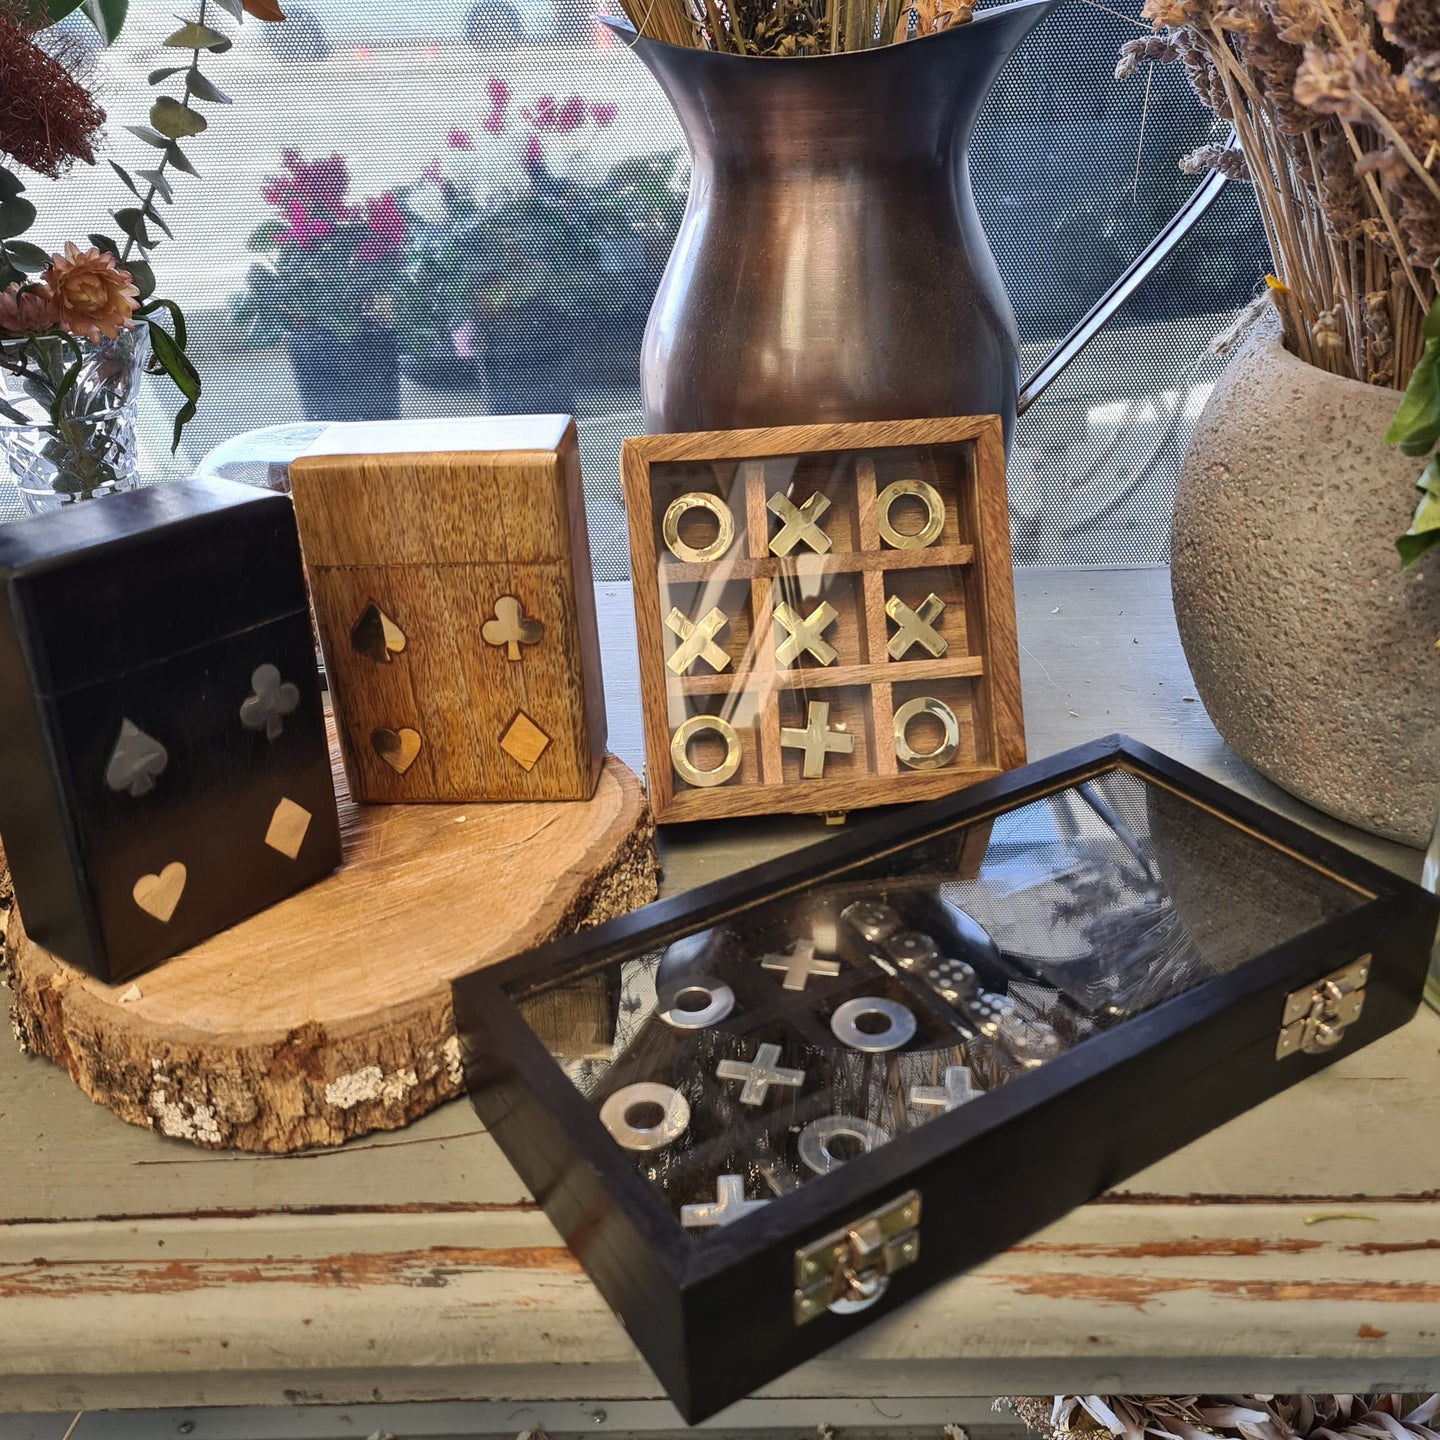 Games in vintage wooden boxes